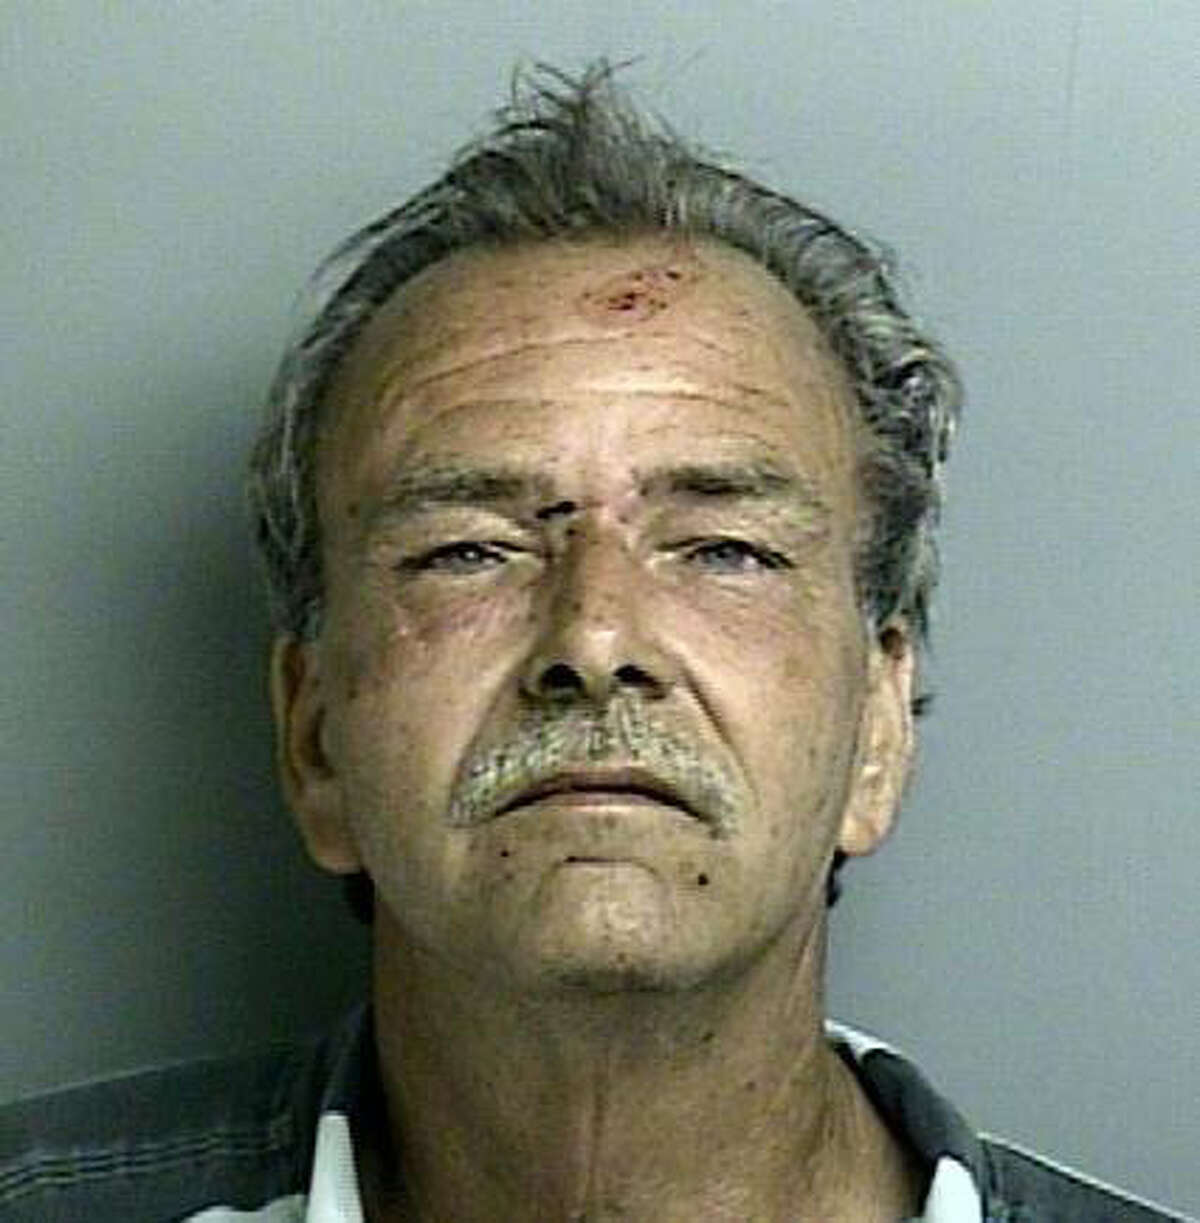 Donald Middleton, 56, of Houston was sentenced by a Montgomery County judge on June 6, 2016 to life in prison for a DWI conviction stemming from an incident on Memorial Day 2015. It was the man?s ninth DWI conviction, and he won?t be eligible for parole for 30 years. Middleton registered a blood alcohol content of more than twice the legal limit after his vehicle struck a car driven by a teenager, who was not injured. The judge found Middleton had used his vehicle as a deadly weapon.